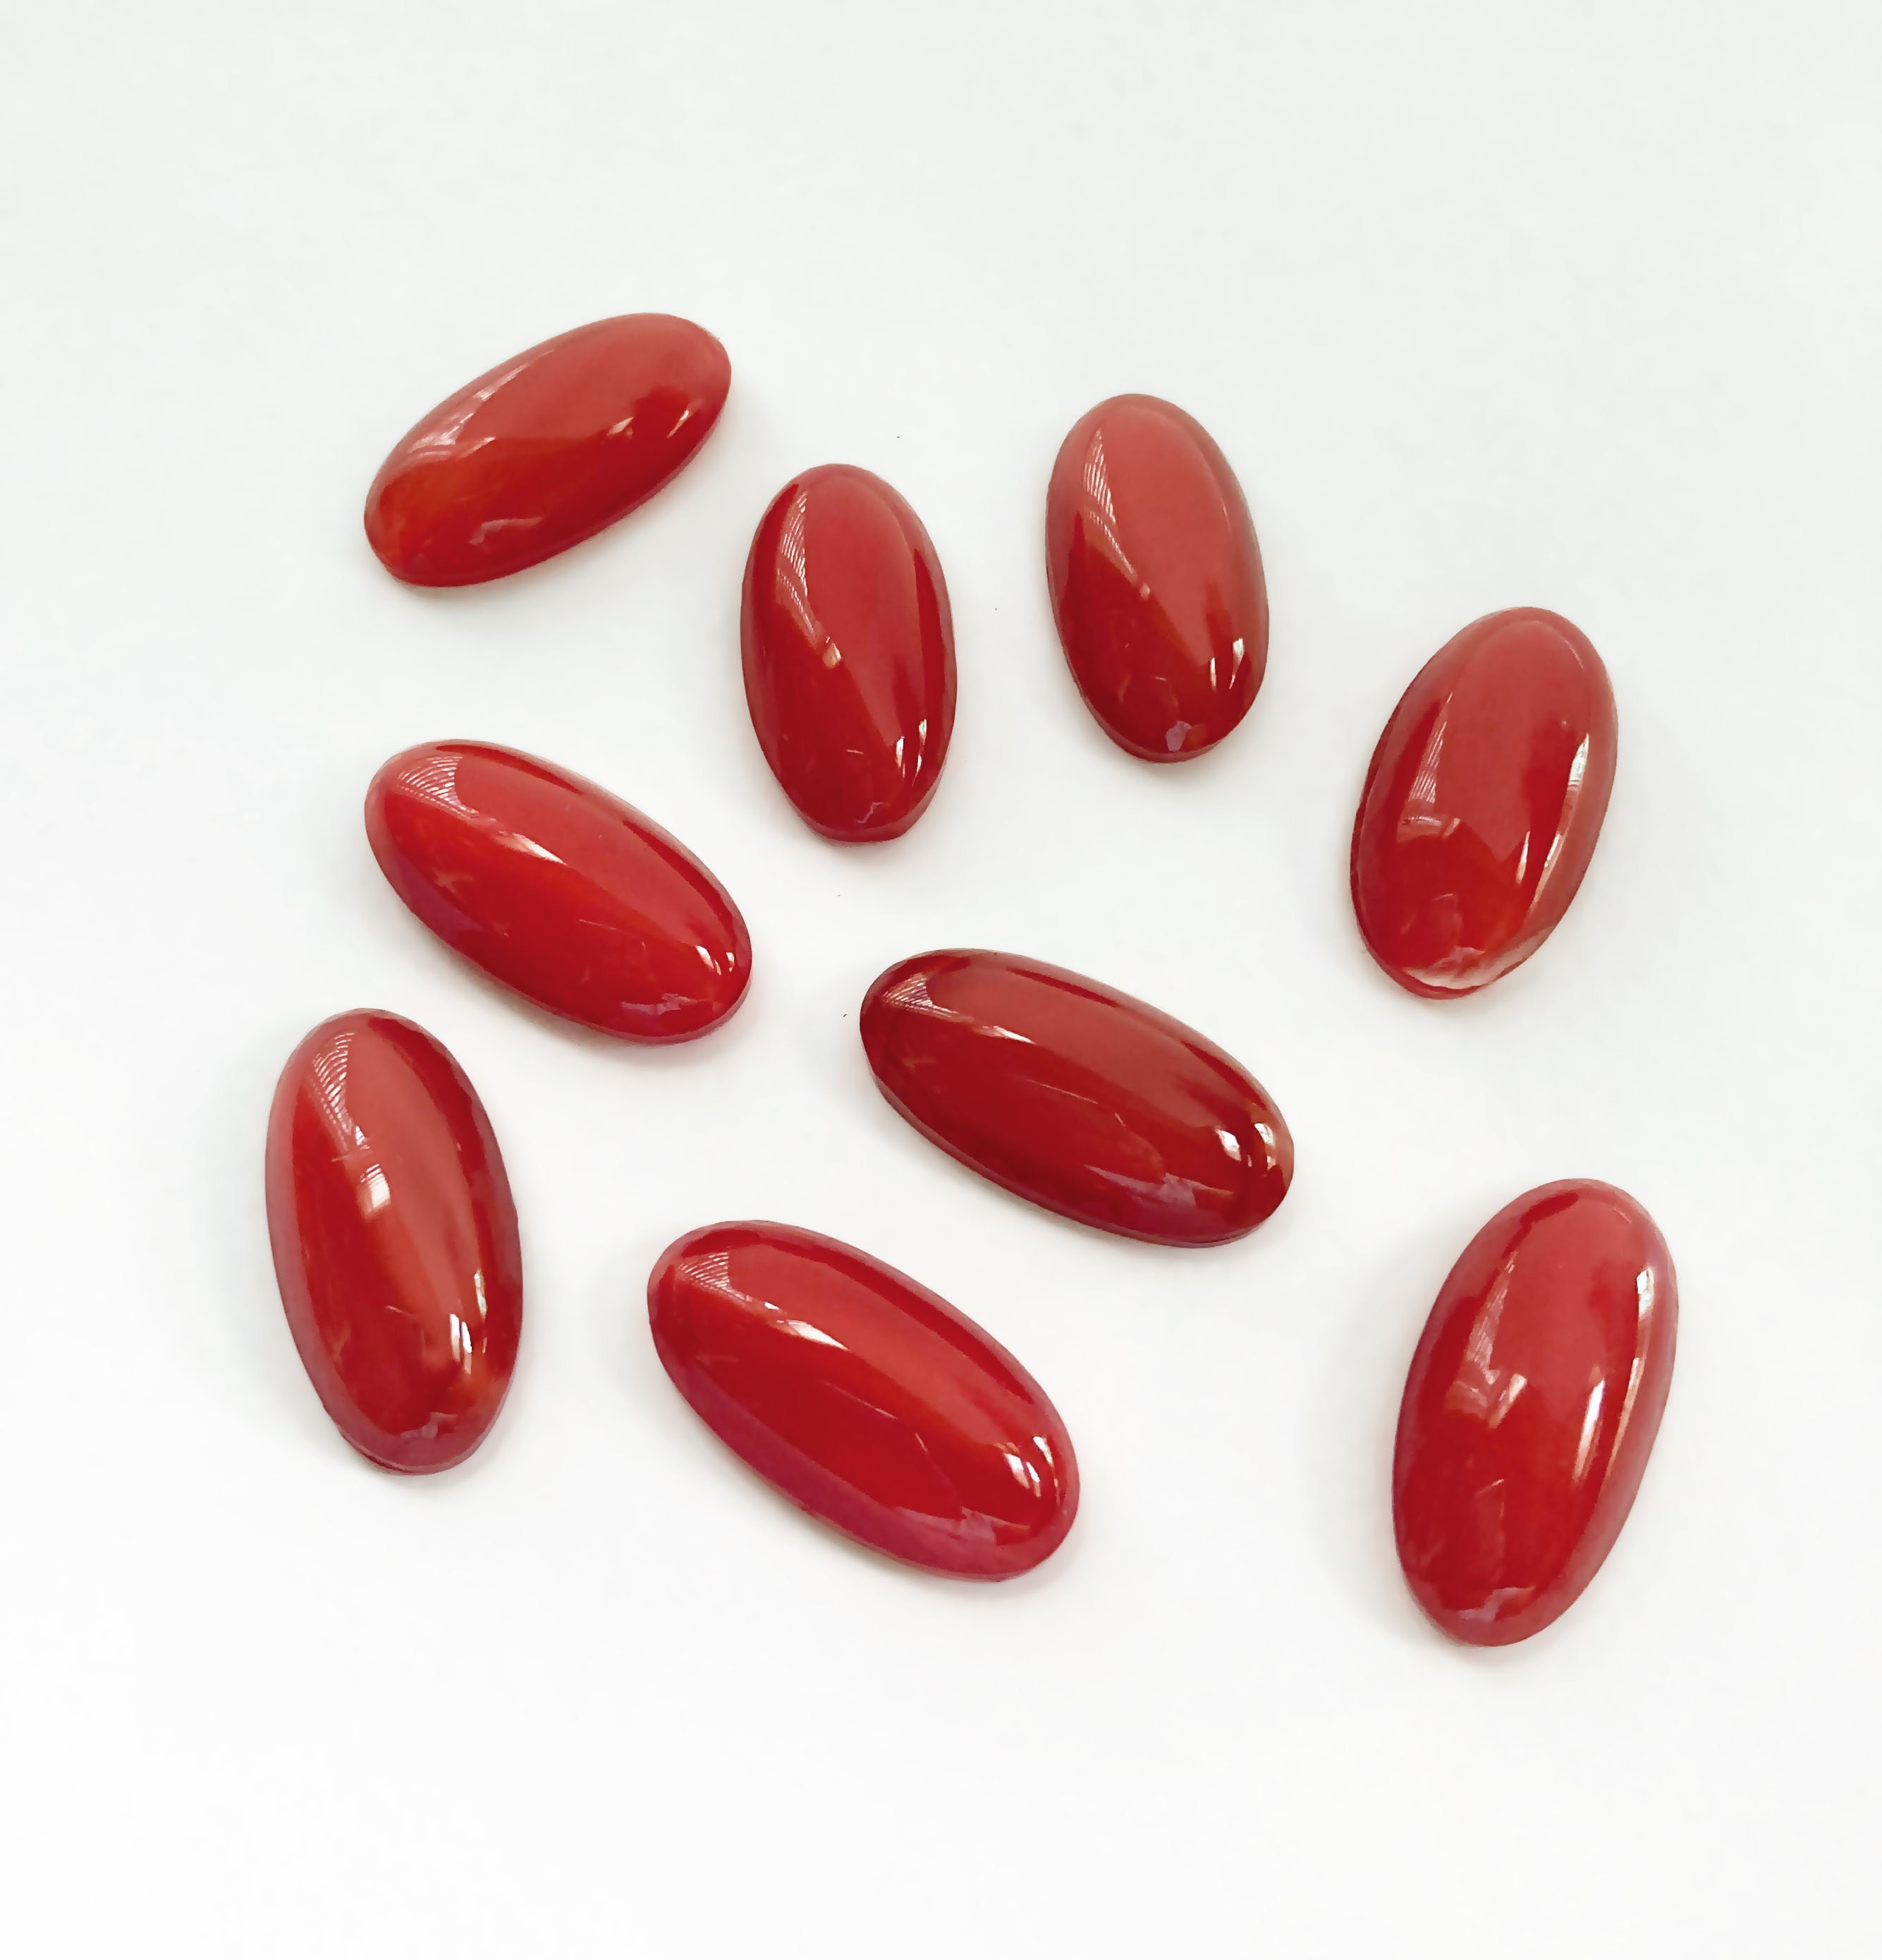 Faceted Garnet Stone / 9 X 7mm / 8 X 6mm / Oval Faceted / Red Cut Stone /  Loose Stones / Gemstone / Red Garnet Gemstone / Jewellery Making 